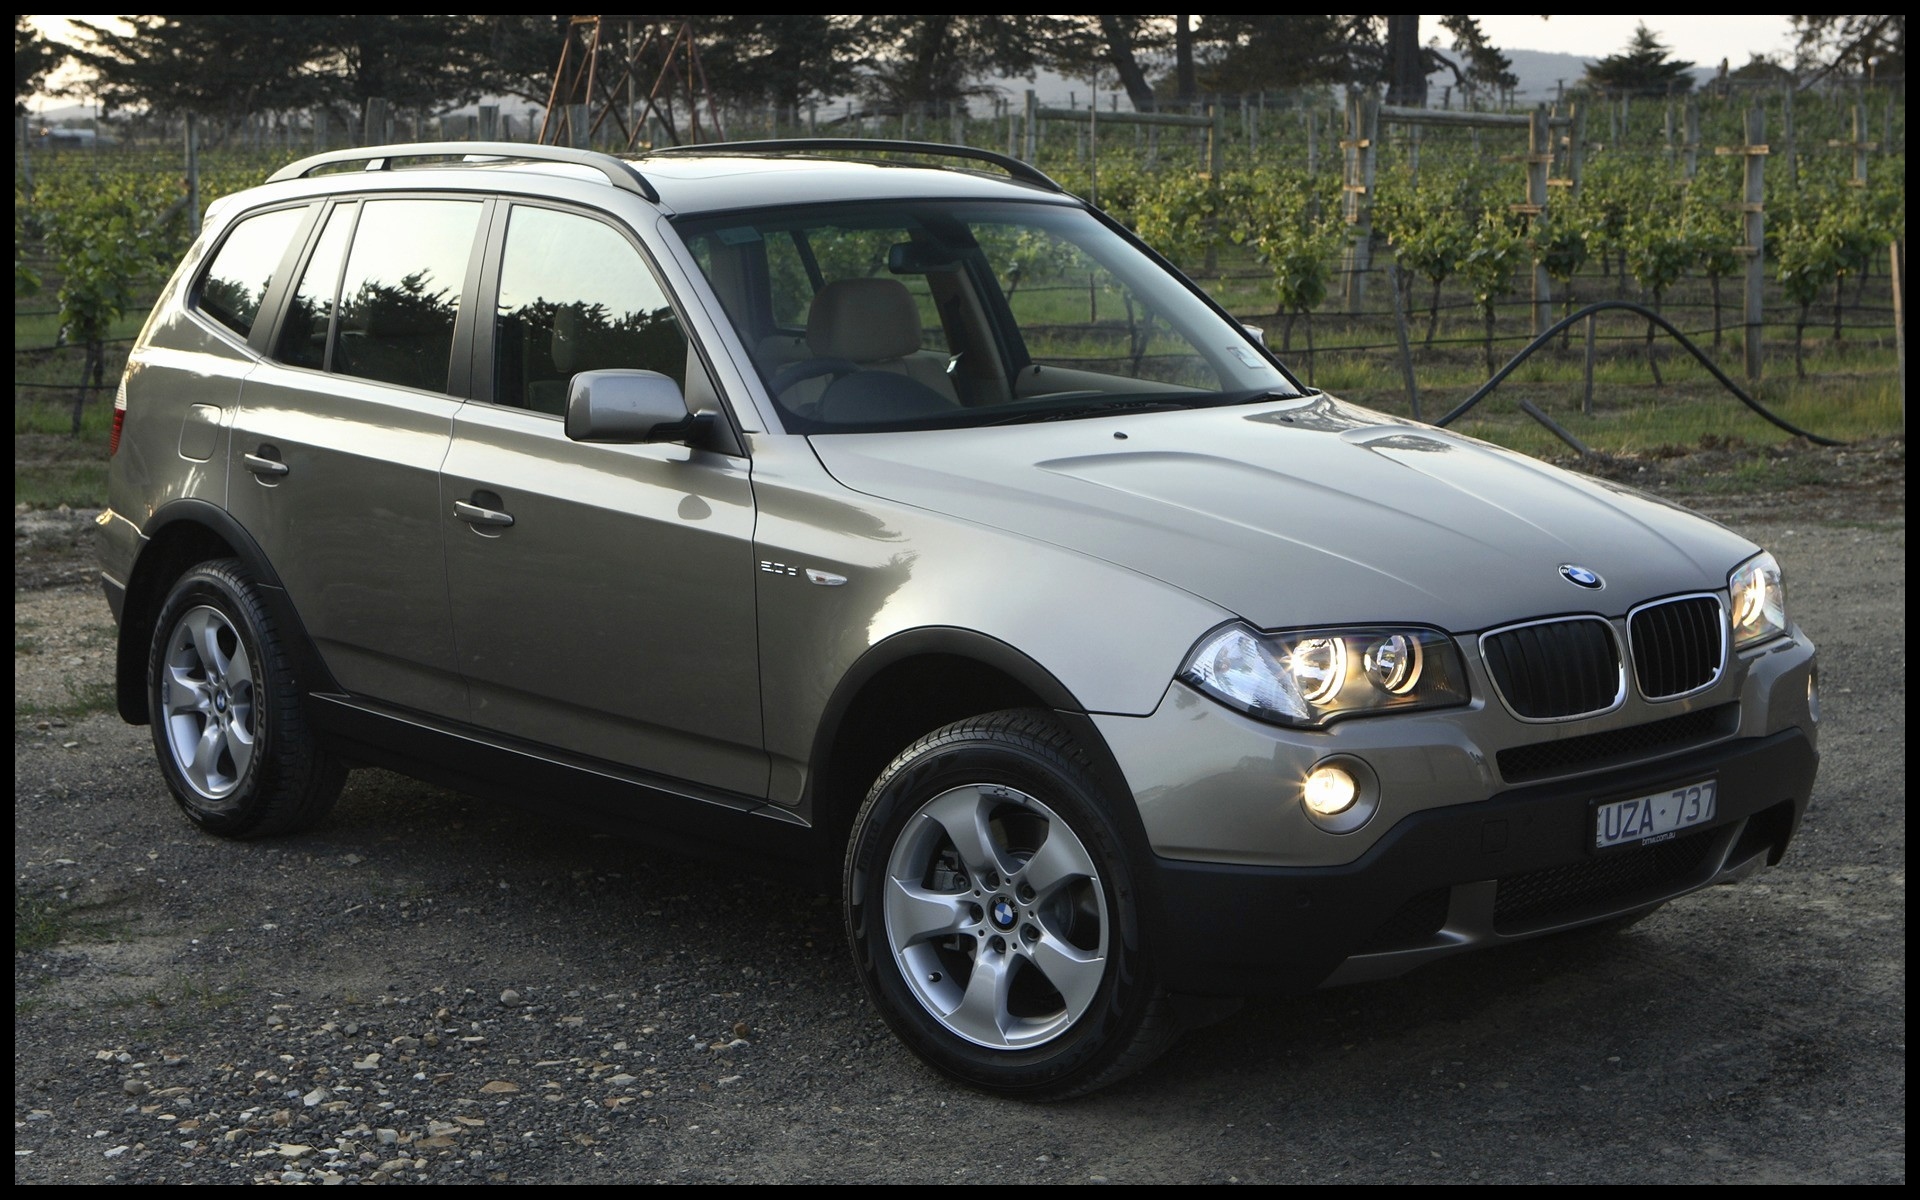 Bmw X3 New How to Wallpaper Lovely Acura 2008 Expensive Bmw X3 2 0d